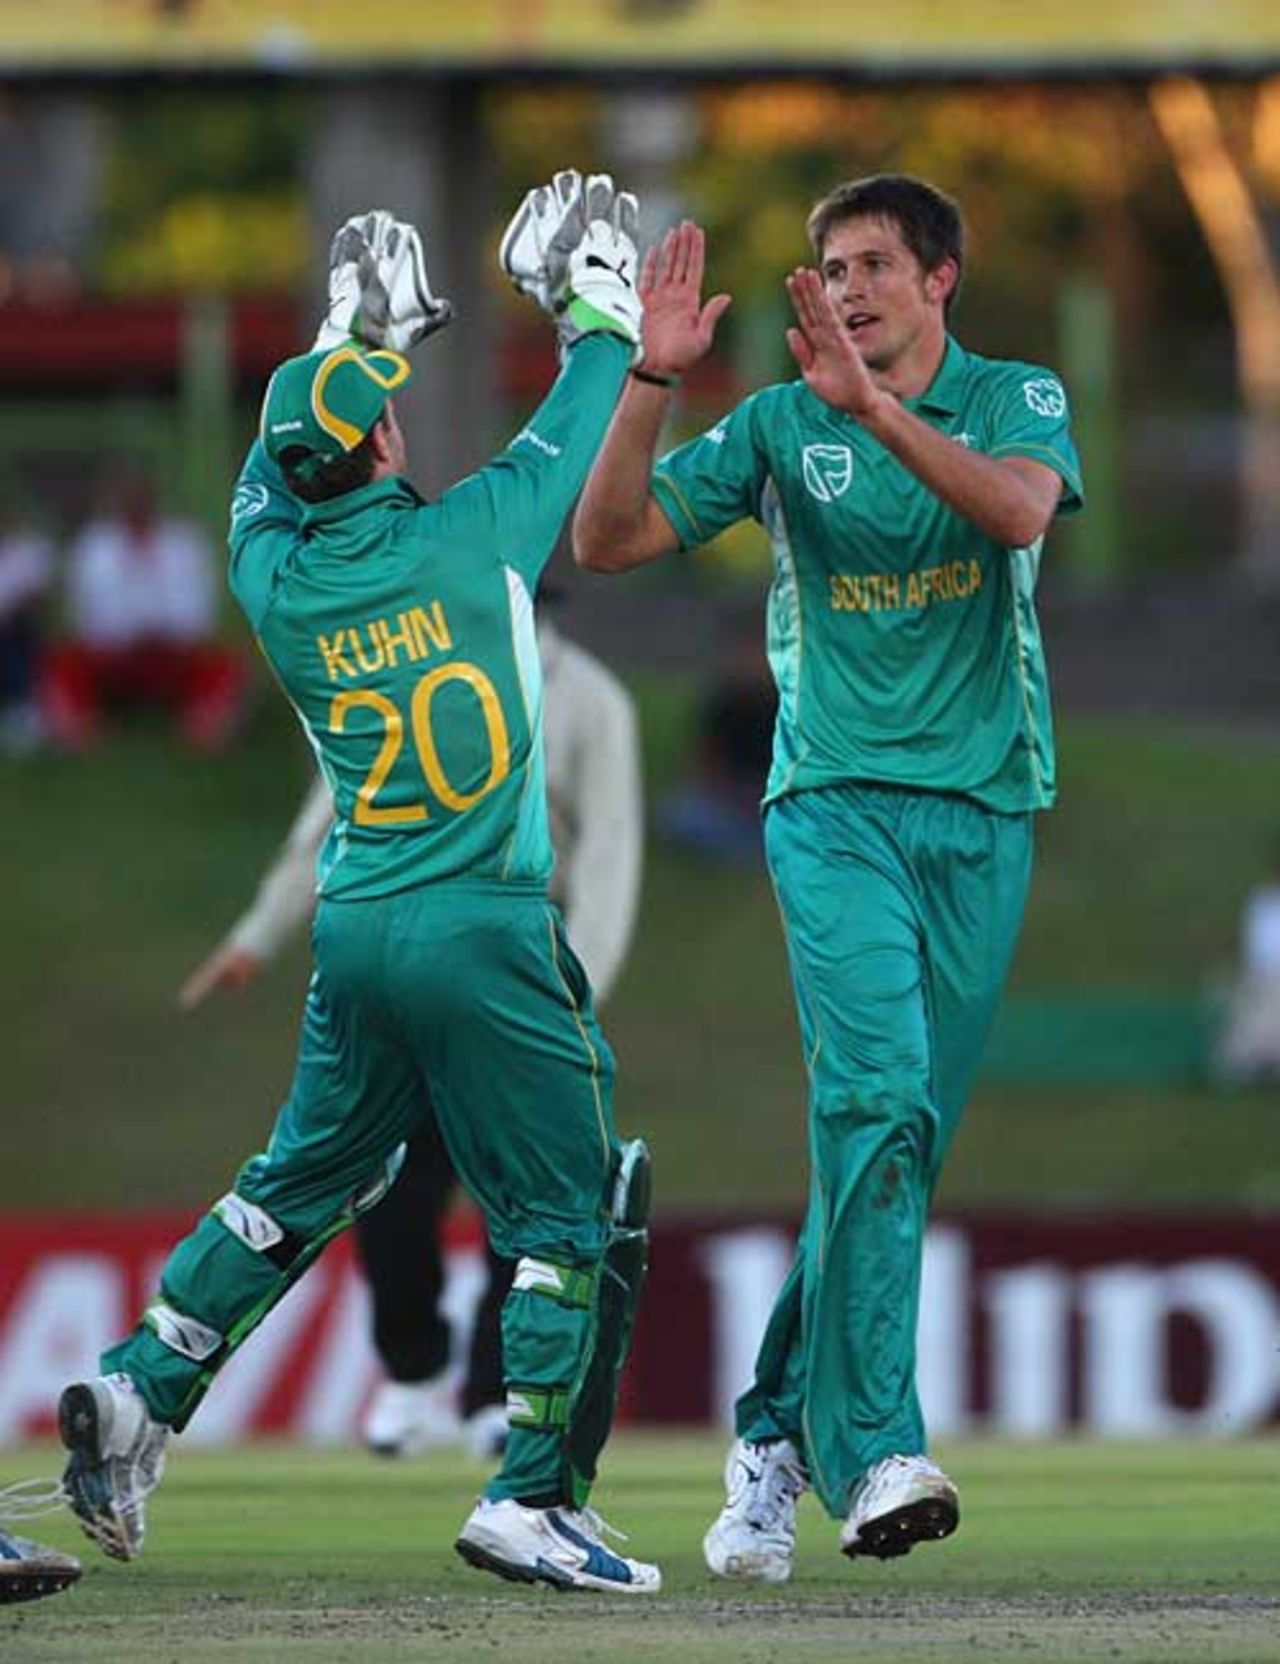 CJ de Villiers took two early wickets to undermine England, South Africa A v England XI, Bloemfontein, November 10, 2009